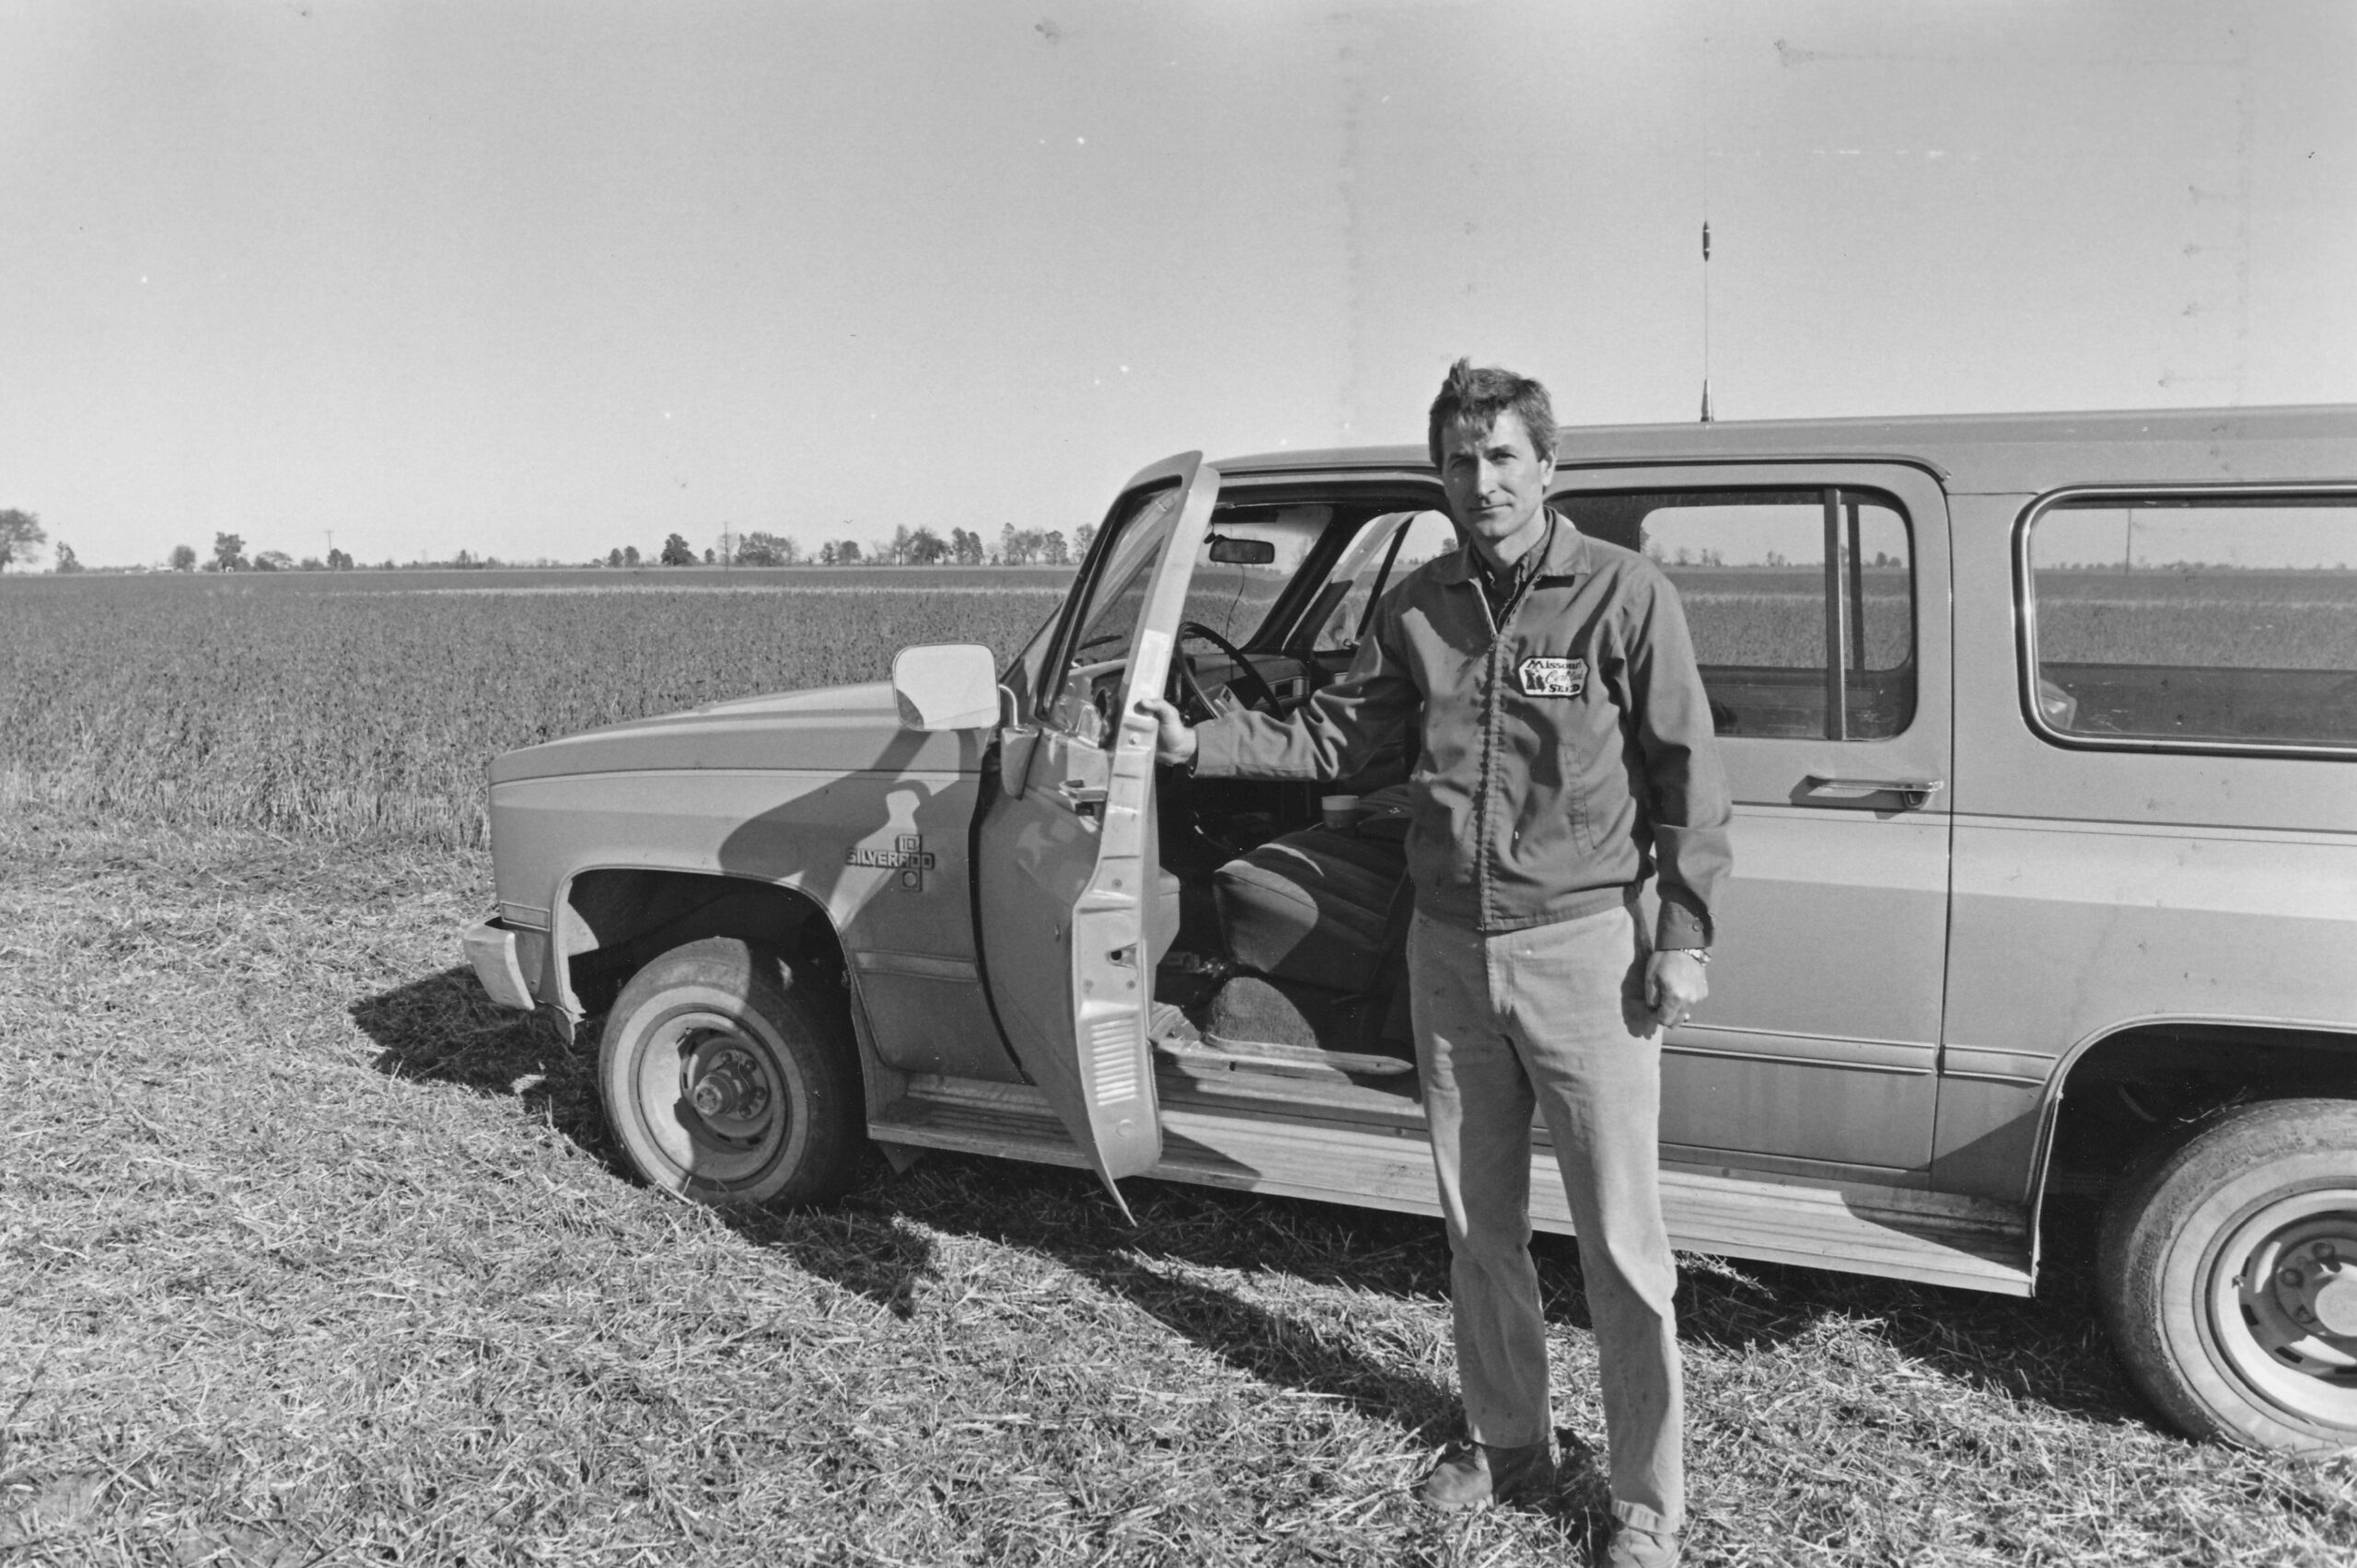 Man standing in front of car and field